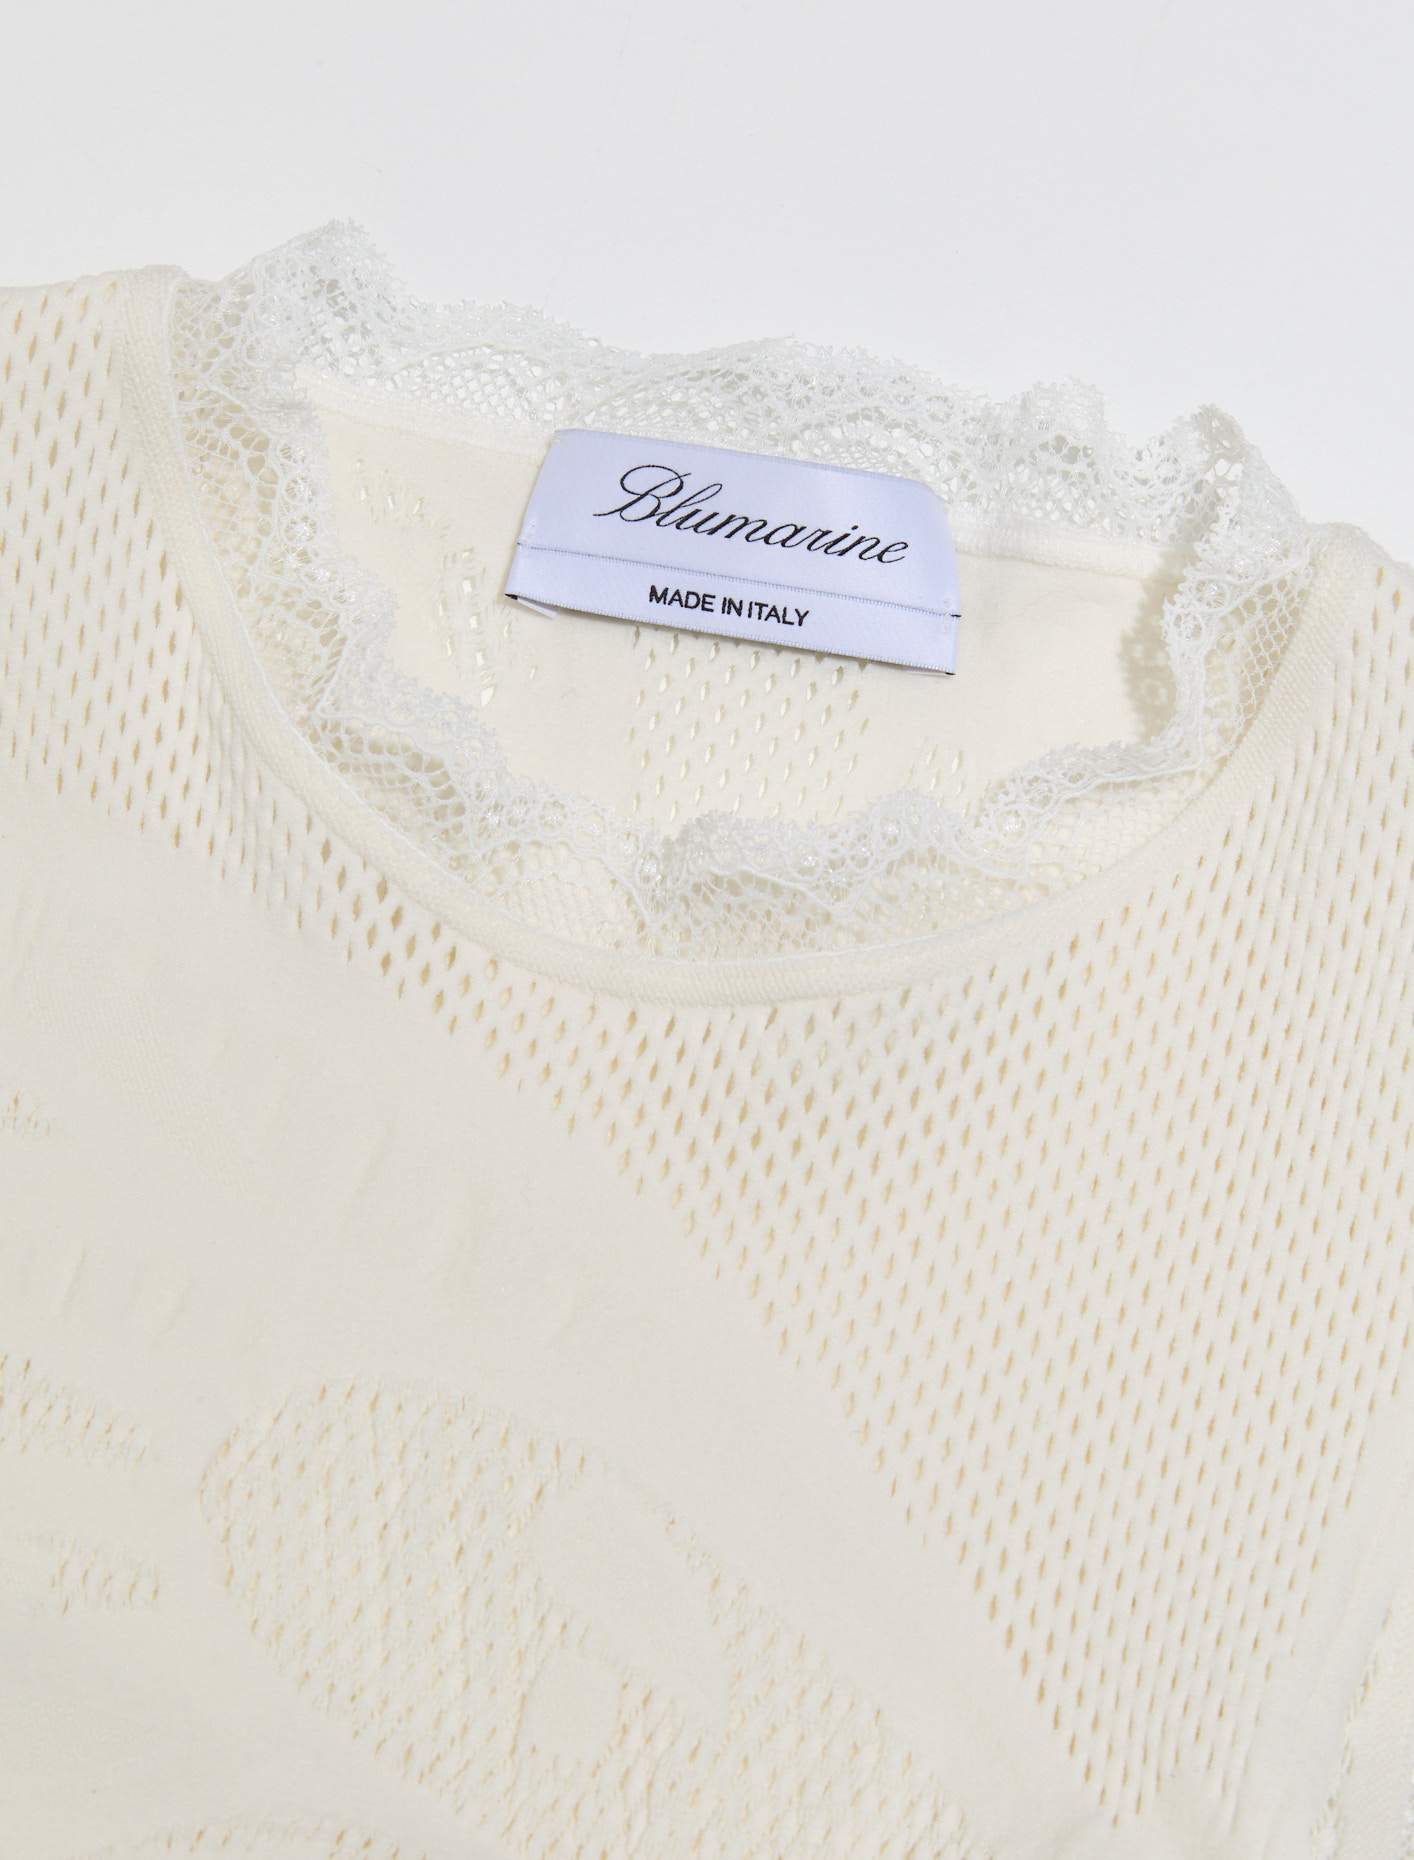 Knit Jacquard Top in Butter